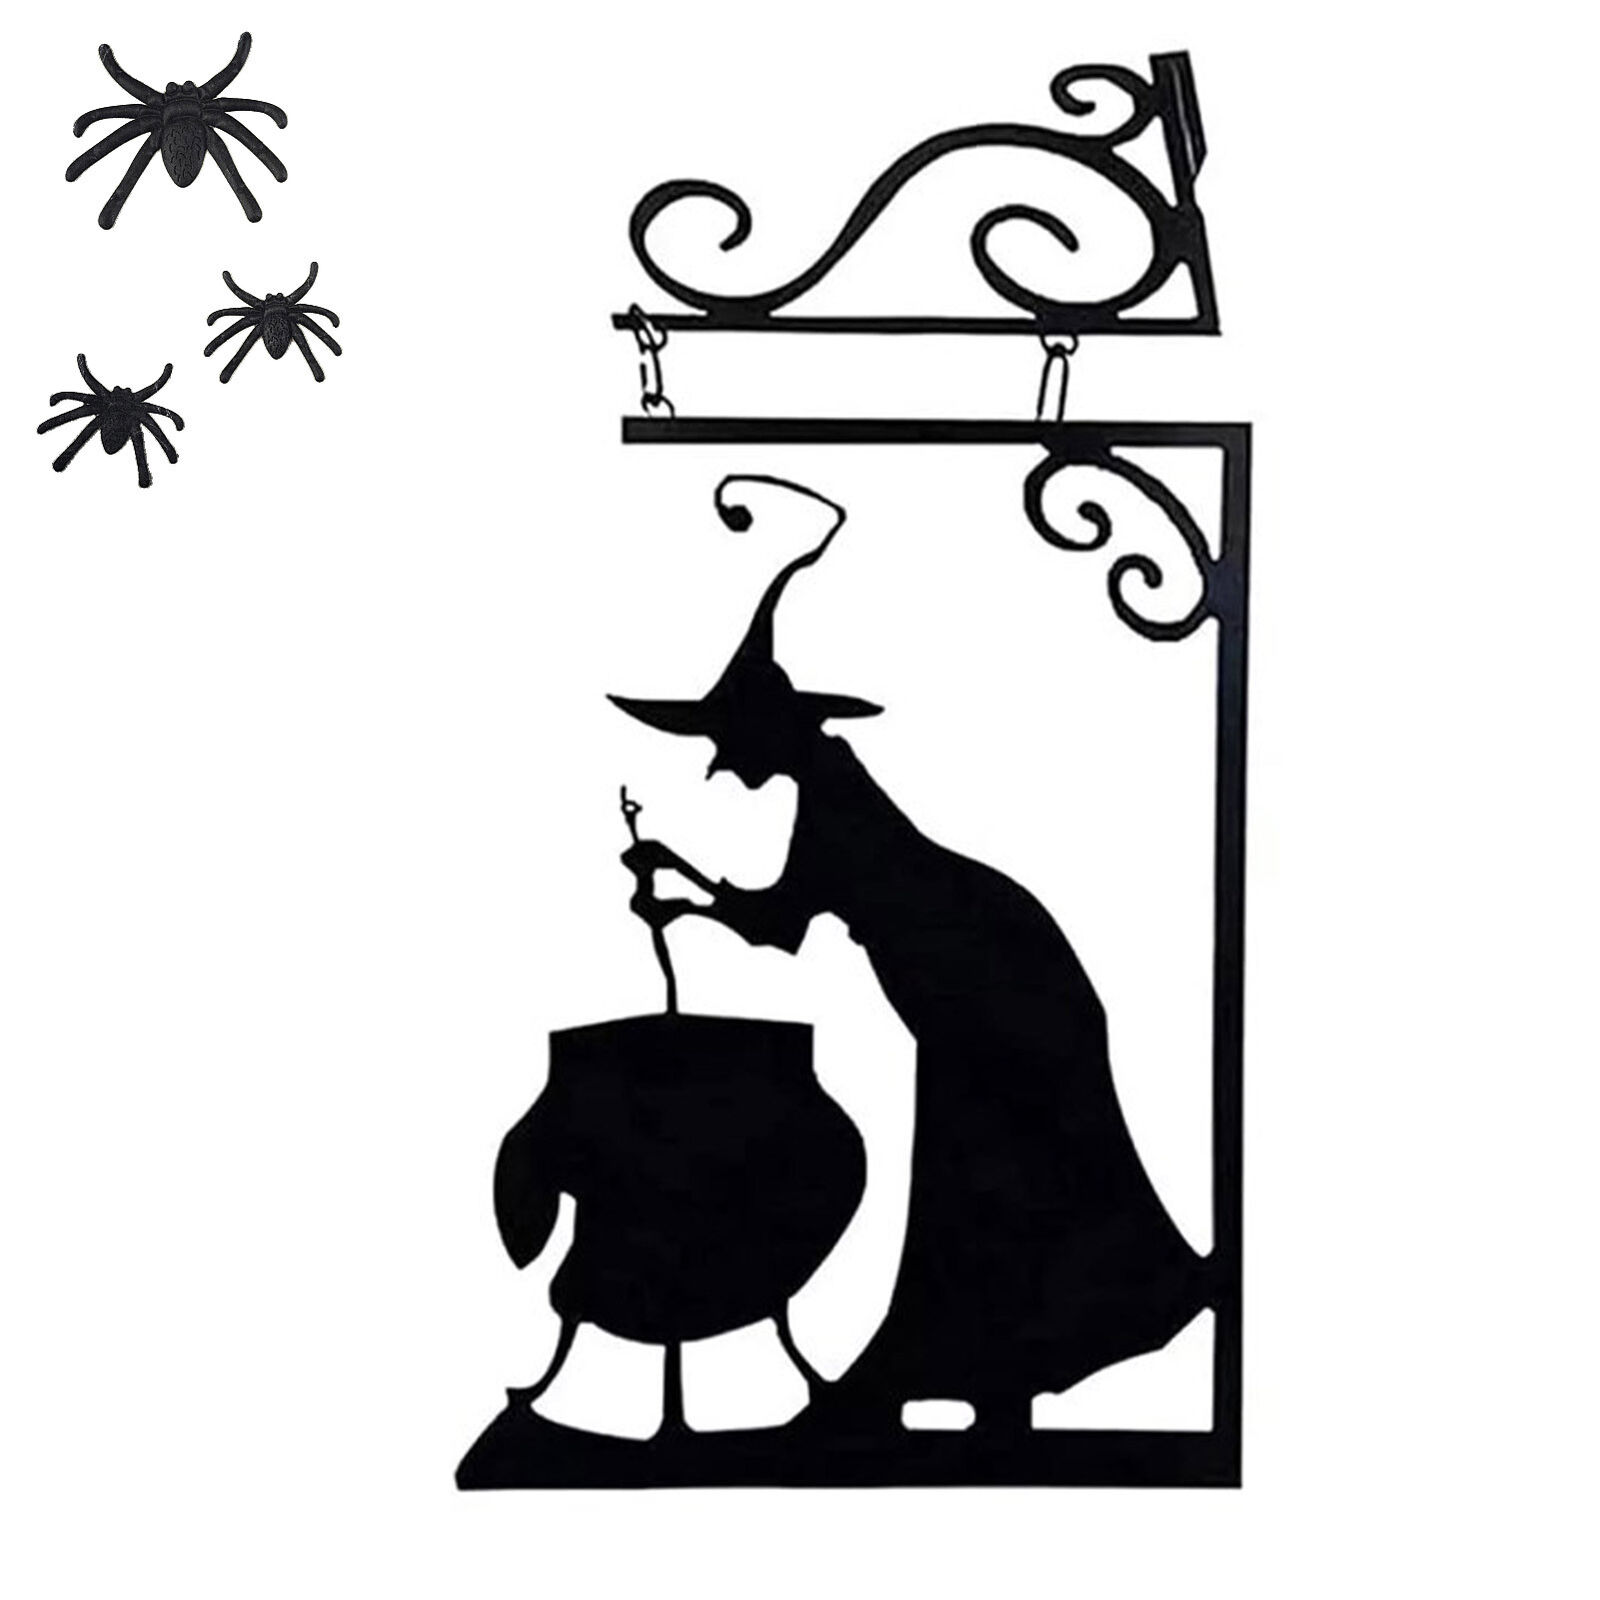 Halloween Witch Metal Silhouette Witch Cauldron Sign Yard Decoration Outdoor